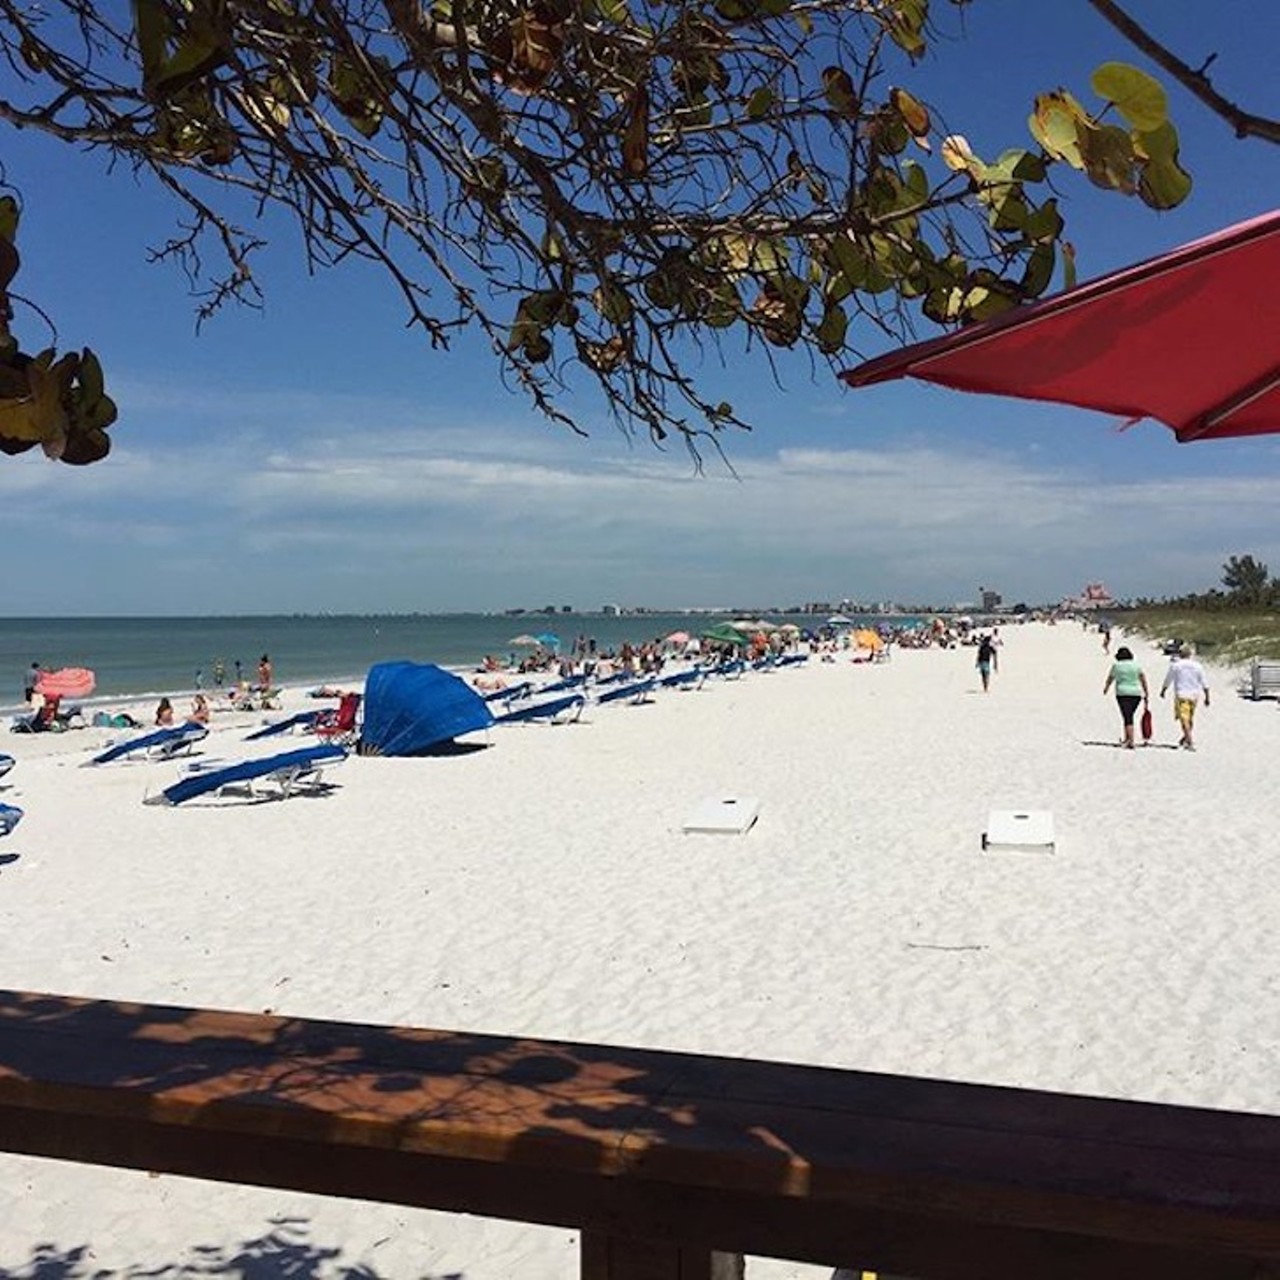 PASS-A-GRILLE BEACH
Take a break from all the happenings in St. Pete for a laid back day at Pass-a-Grille. This beach is great for dolphin-watching just off shore. Stick around to watch them ring the town bell, which is a nice little daily tradition.
Distance: 2 hours and 16 minutes
Photo via gypzcasey/Instagram